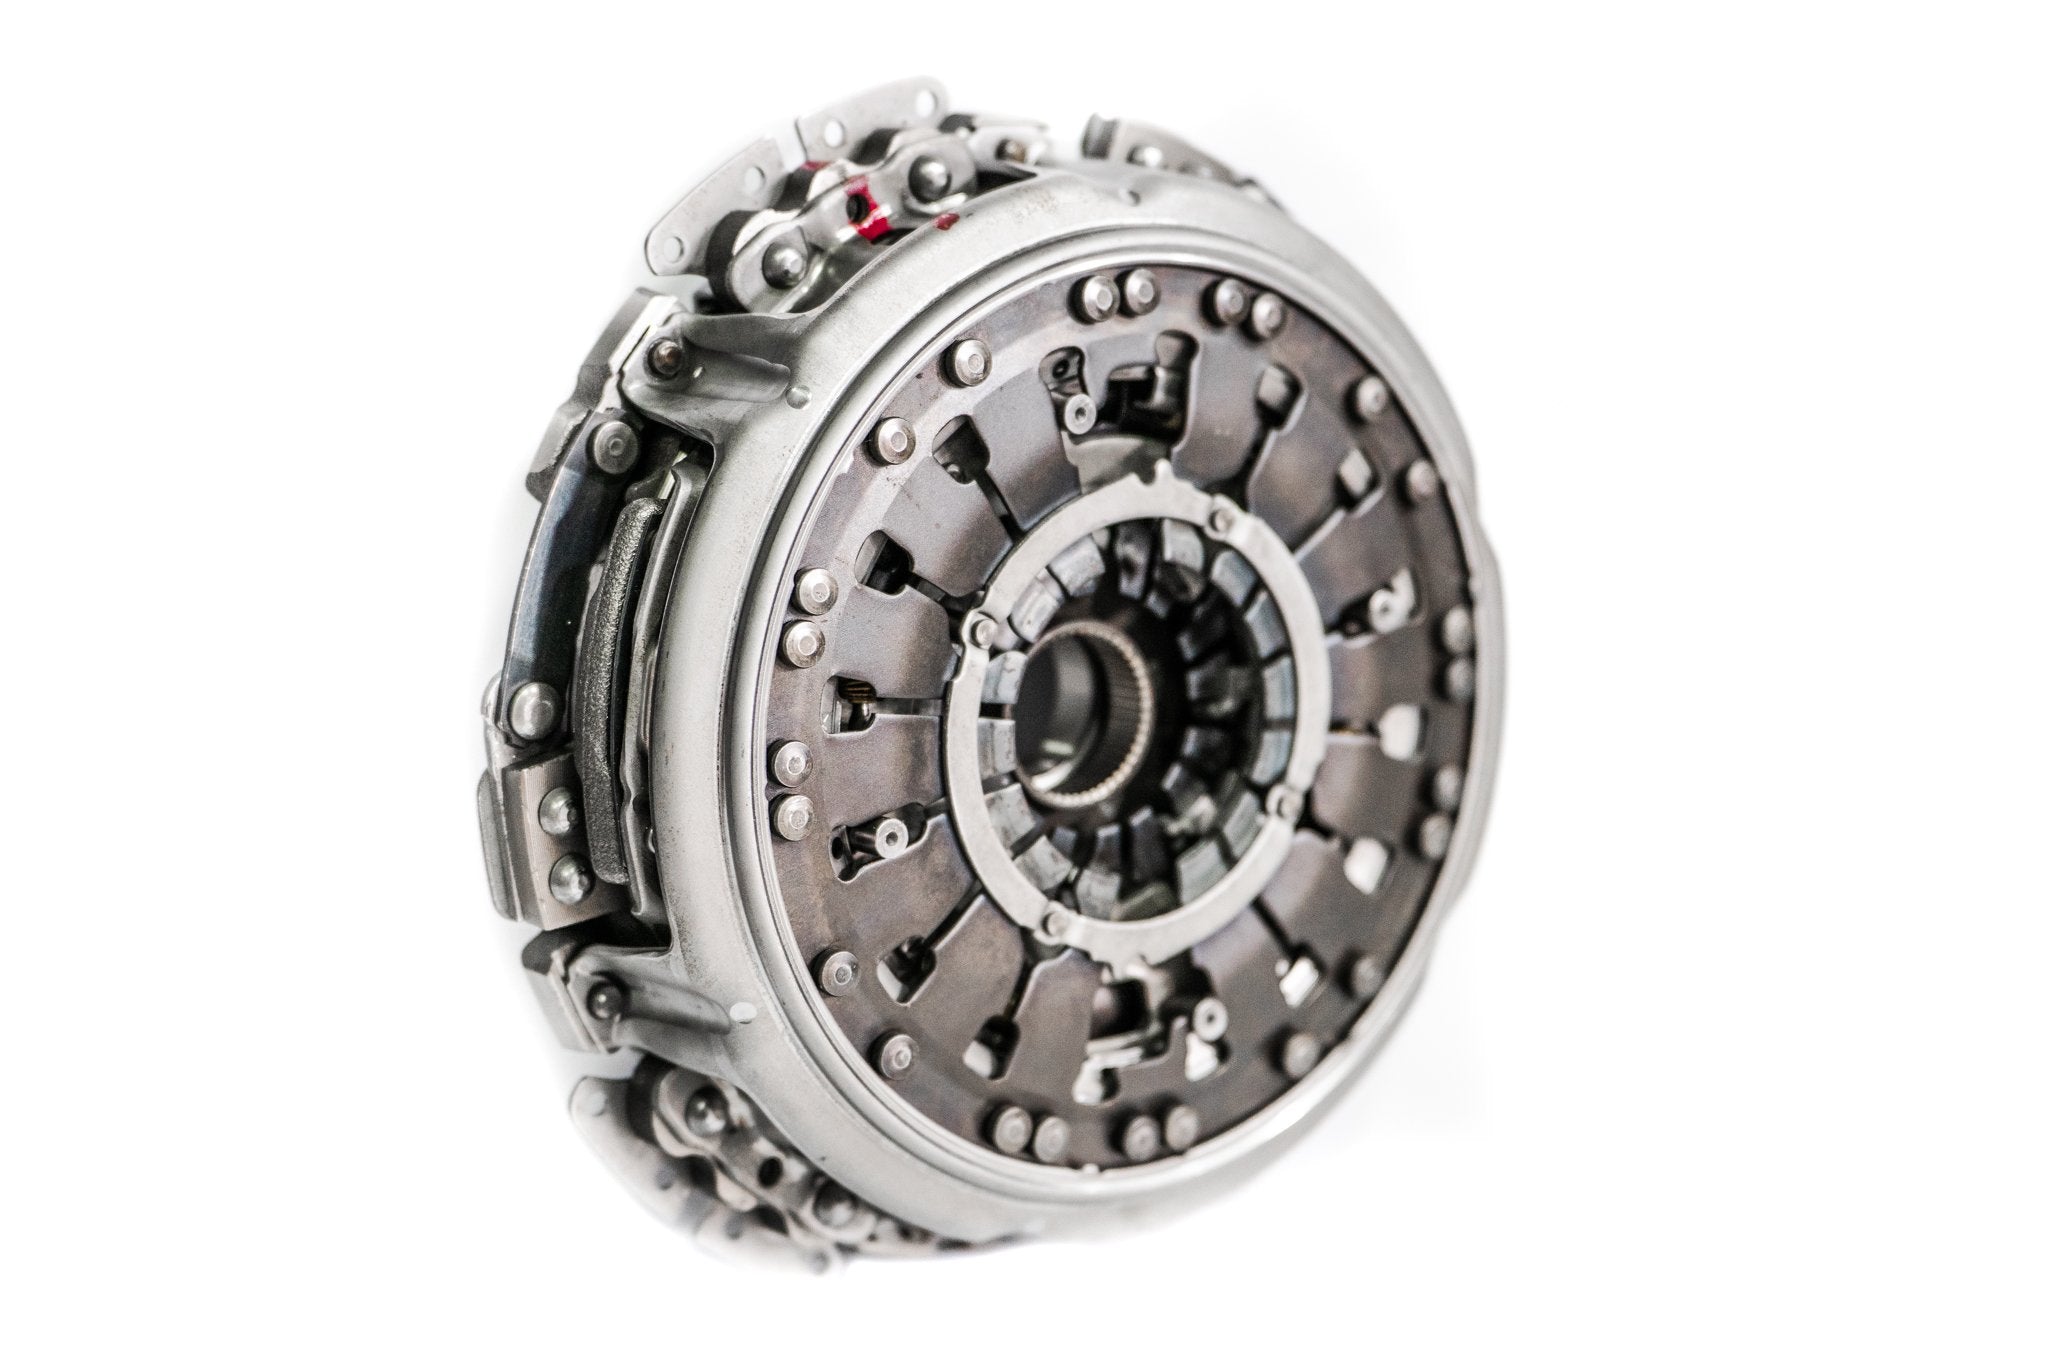 DSG DQ200 Gen 2 (MY2012+) Upgraded Clutch with Kevlar Discs up to 470 Nm - RTMG Performance